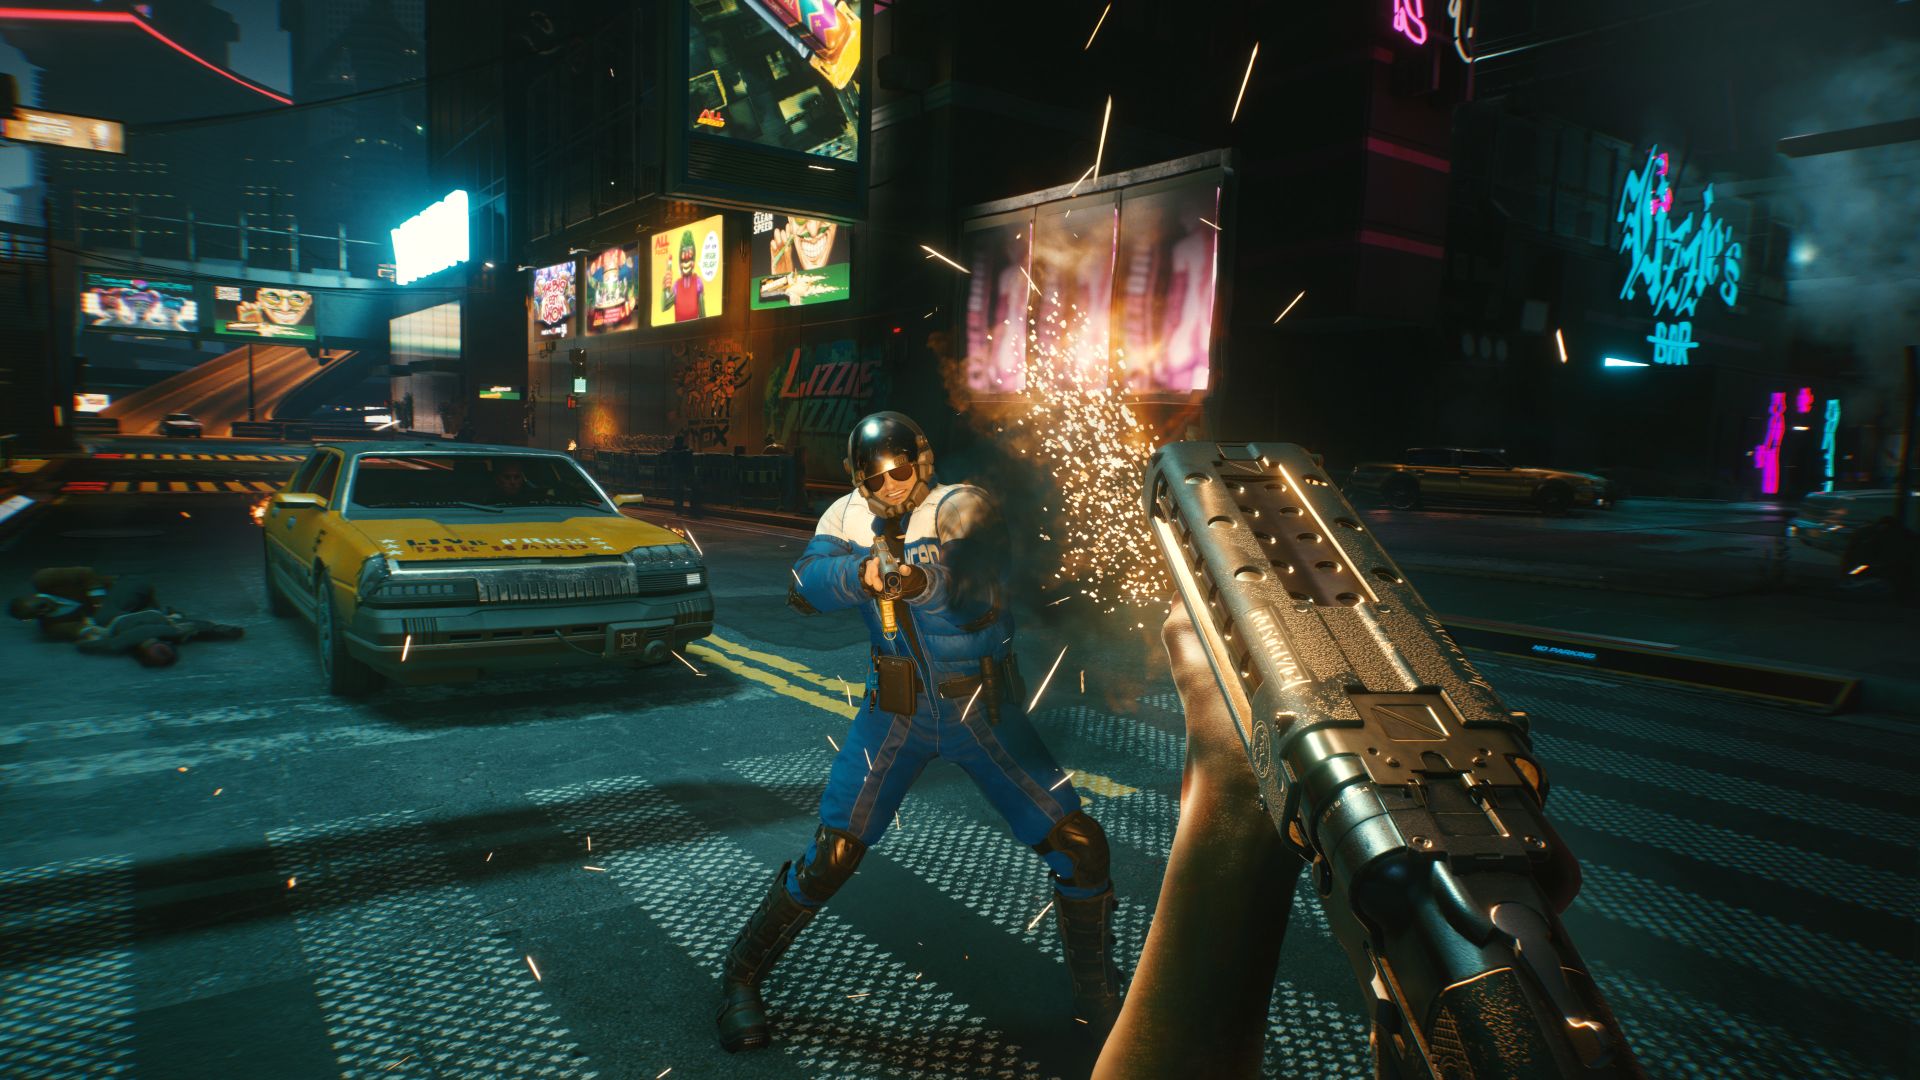 Cyberpunk 2077 Multiplayer Will Have Microtransactions, But They “won’t Be Aggressive”